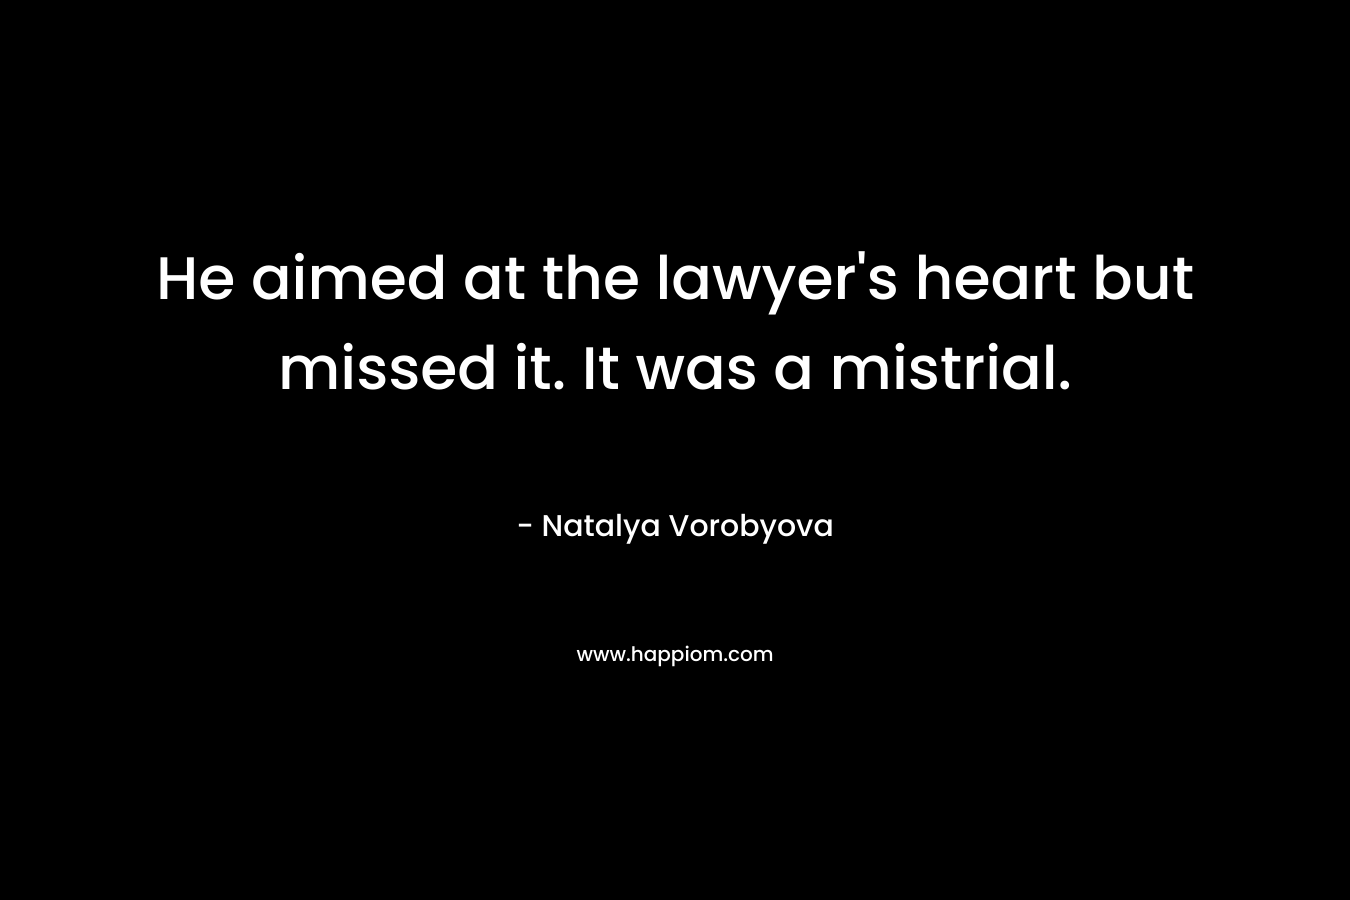 He aimed at the lawyer's heart but missed it. It was a mistrial.